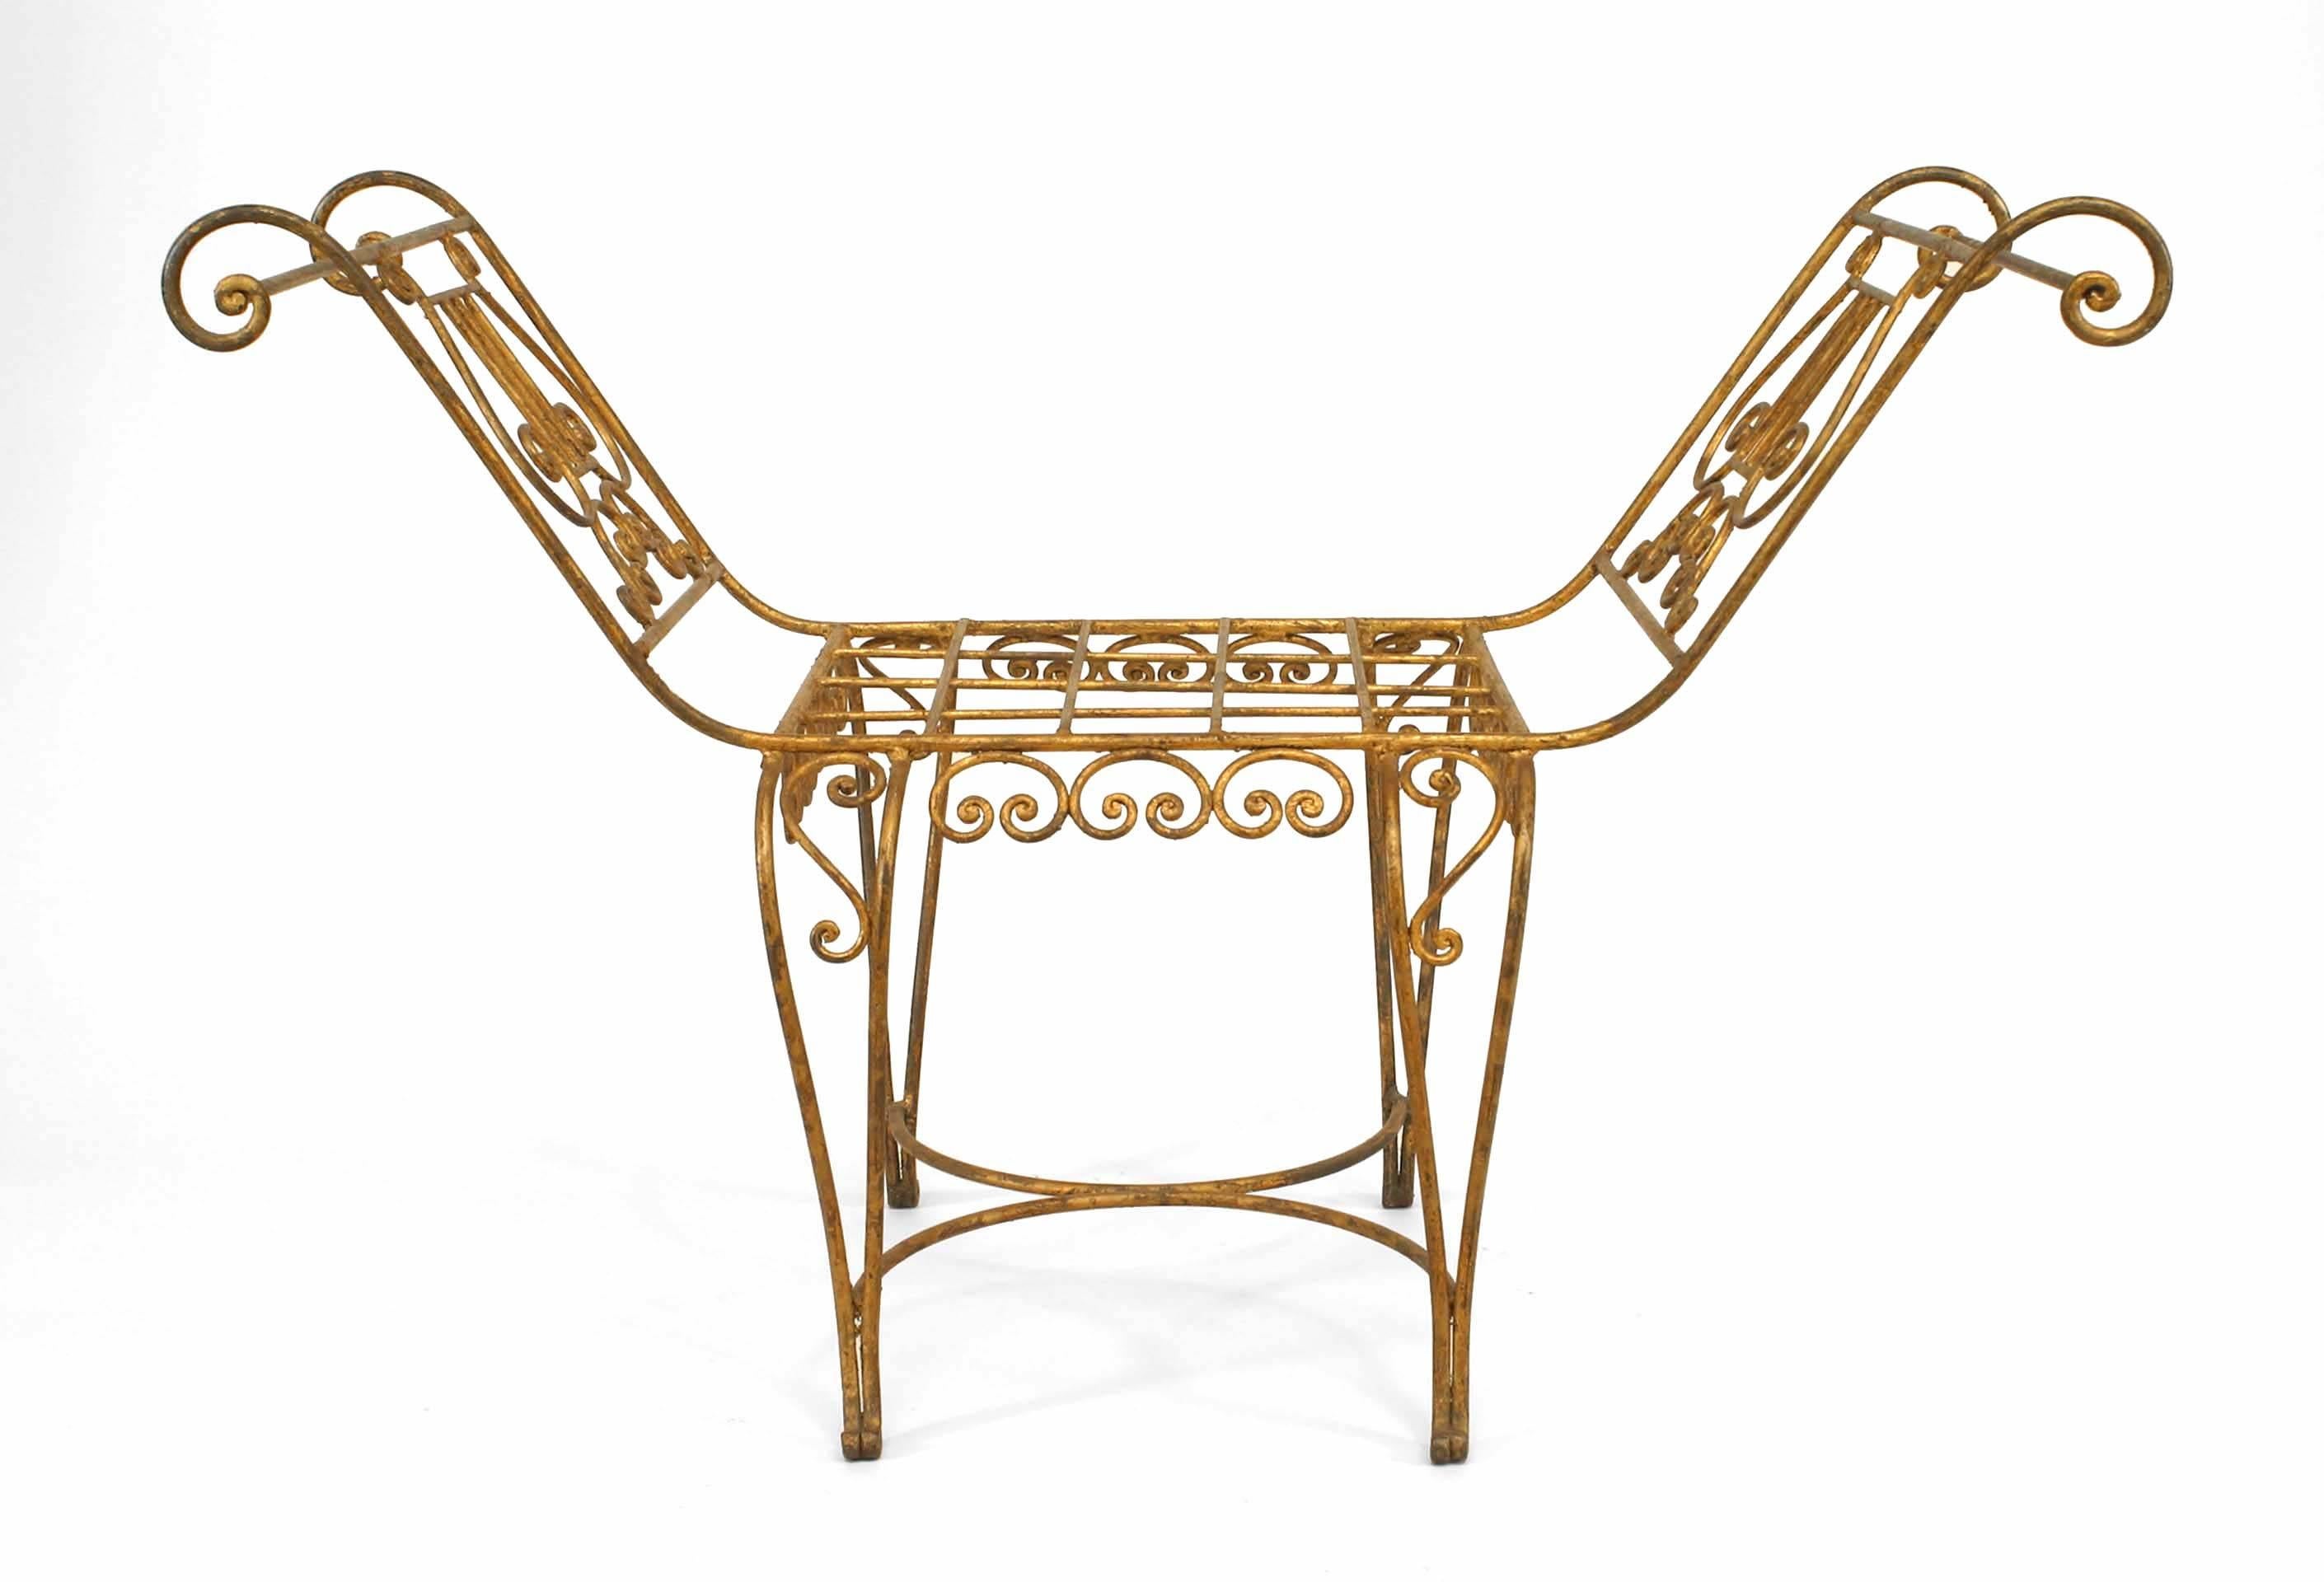 French Art Moderne (1940s) gilt wrought iron window bench with scrolling legs and arms with lyre form
